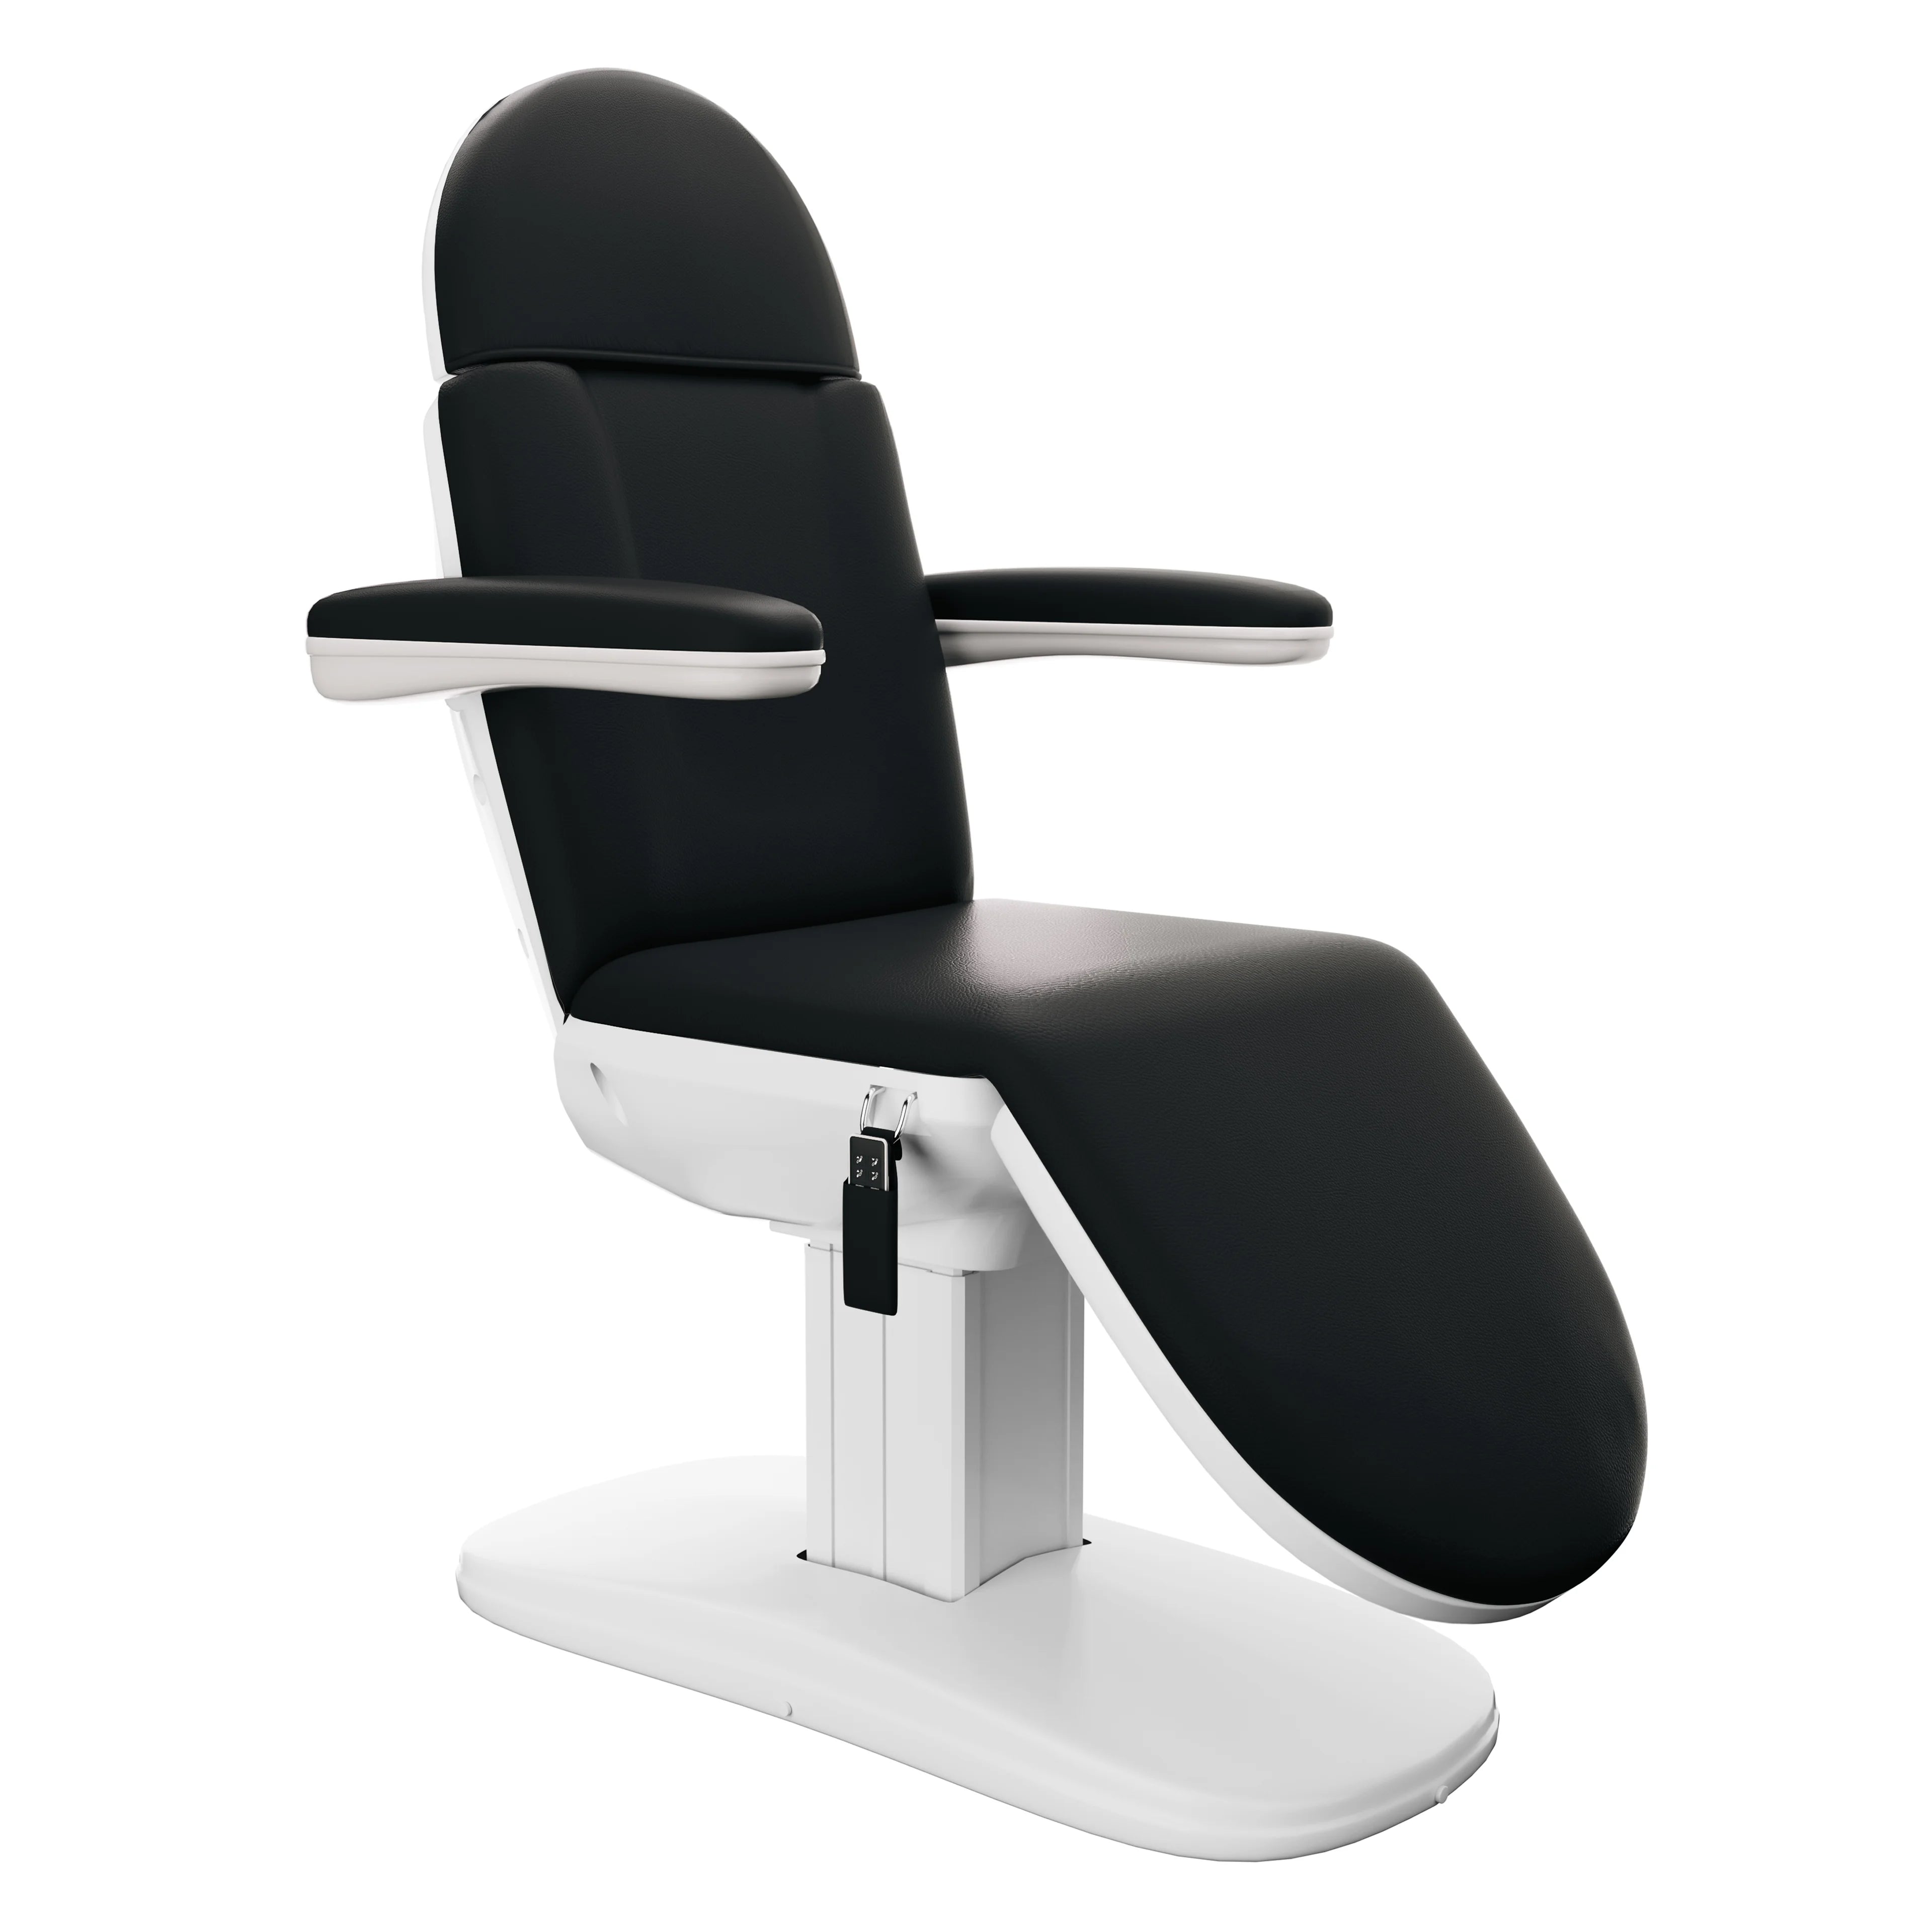 SpaMarc . Benefic (Black) . 4 Motor Spa Treatment Chair/Bed . (Wireless Remote)